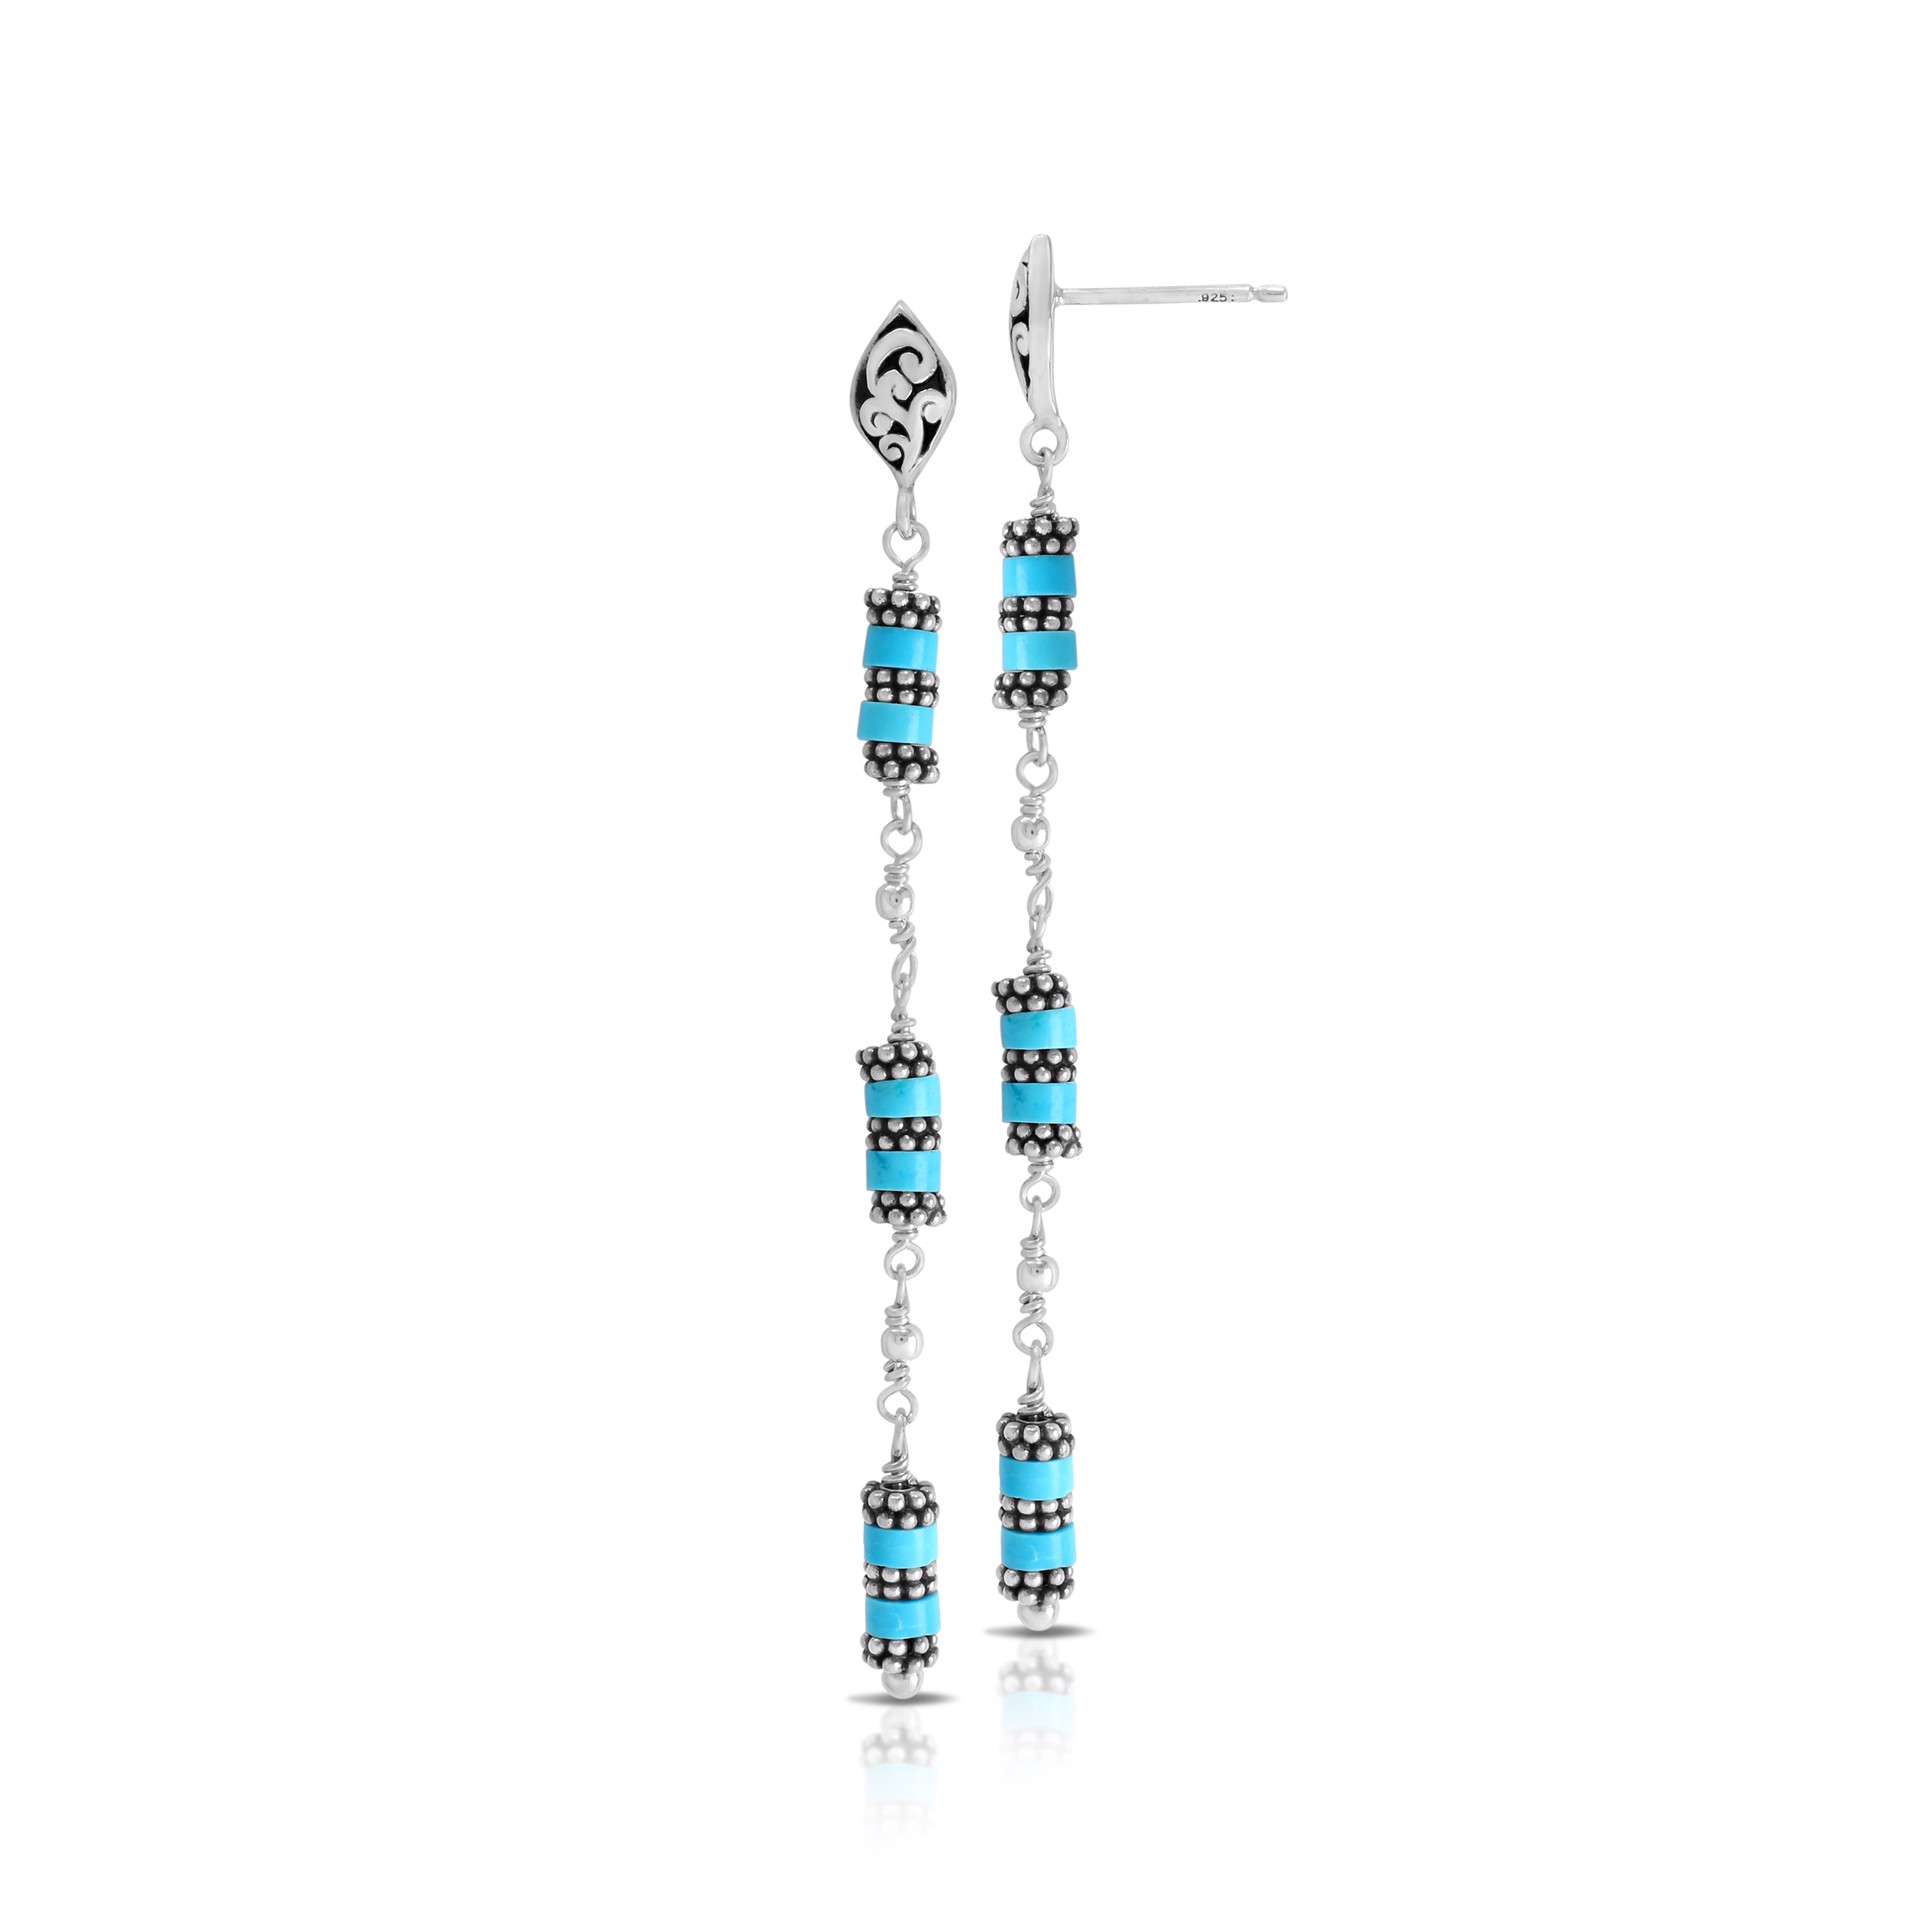 Sterling Silver and Turquoise Drop Earrings with Silver Beads and Earring Backing by Lois Hill